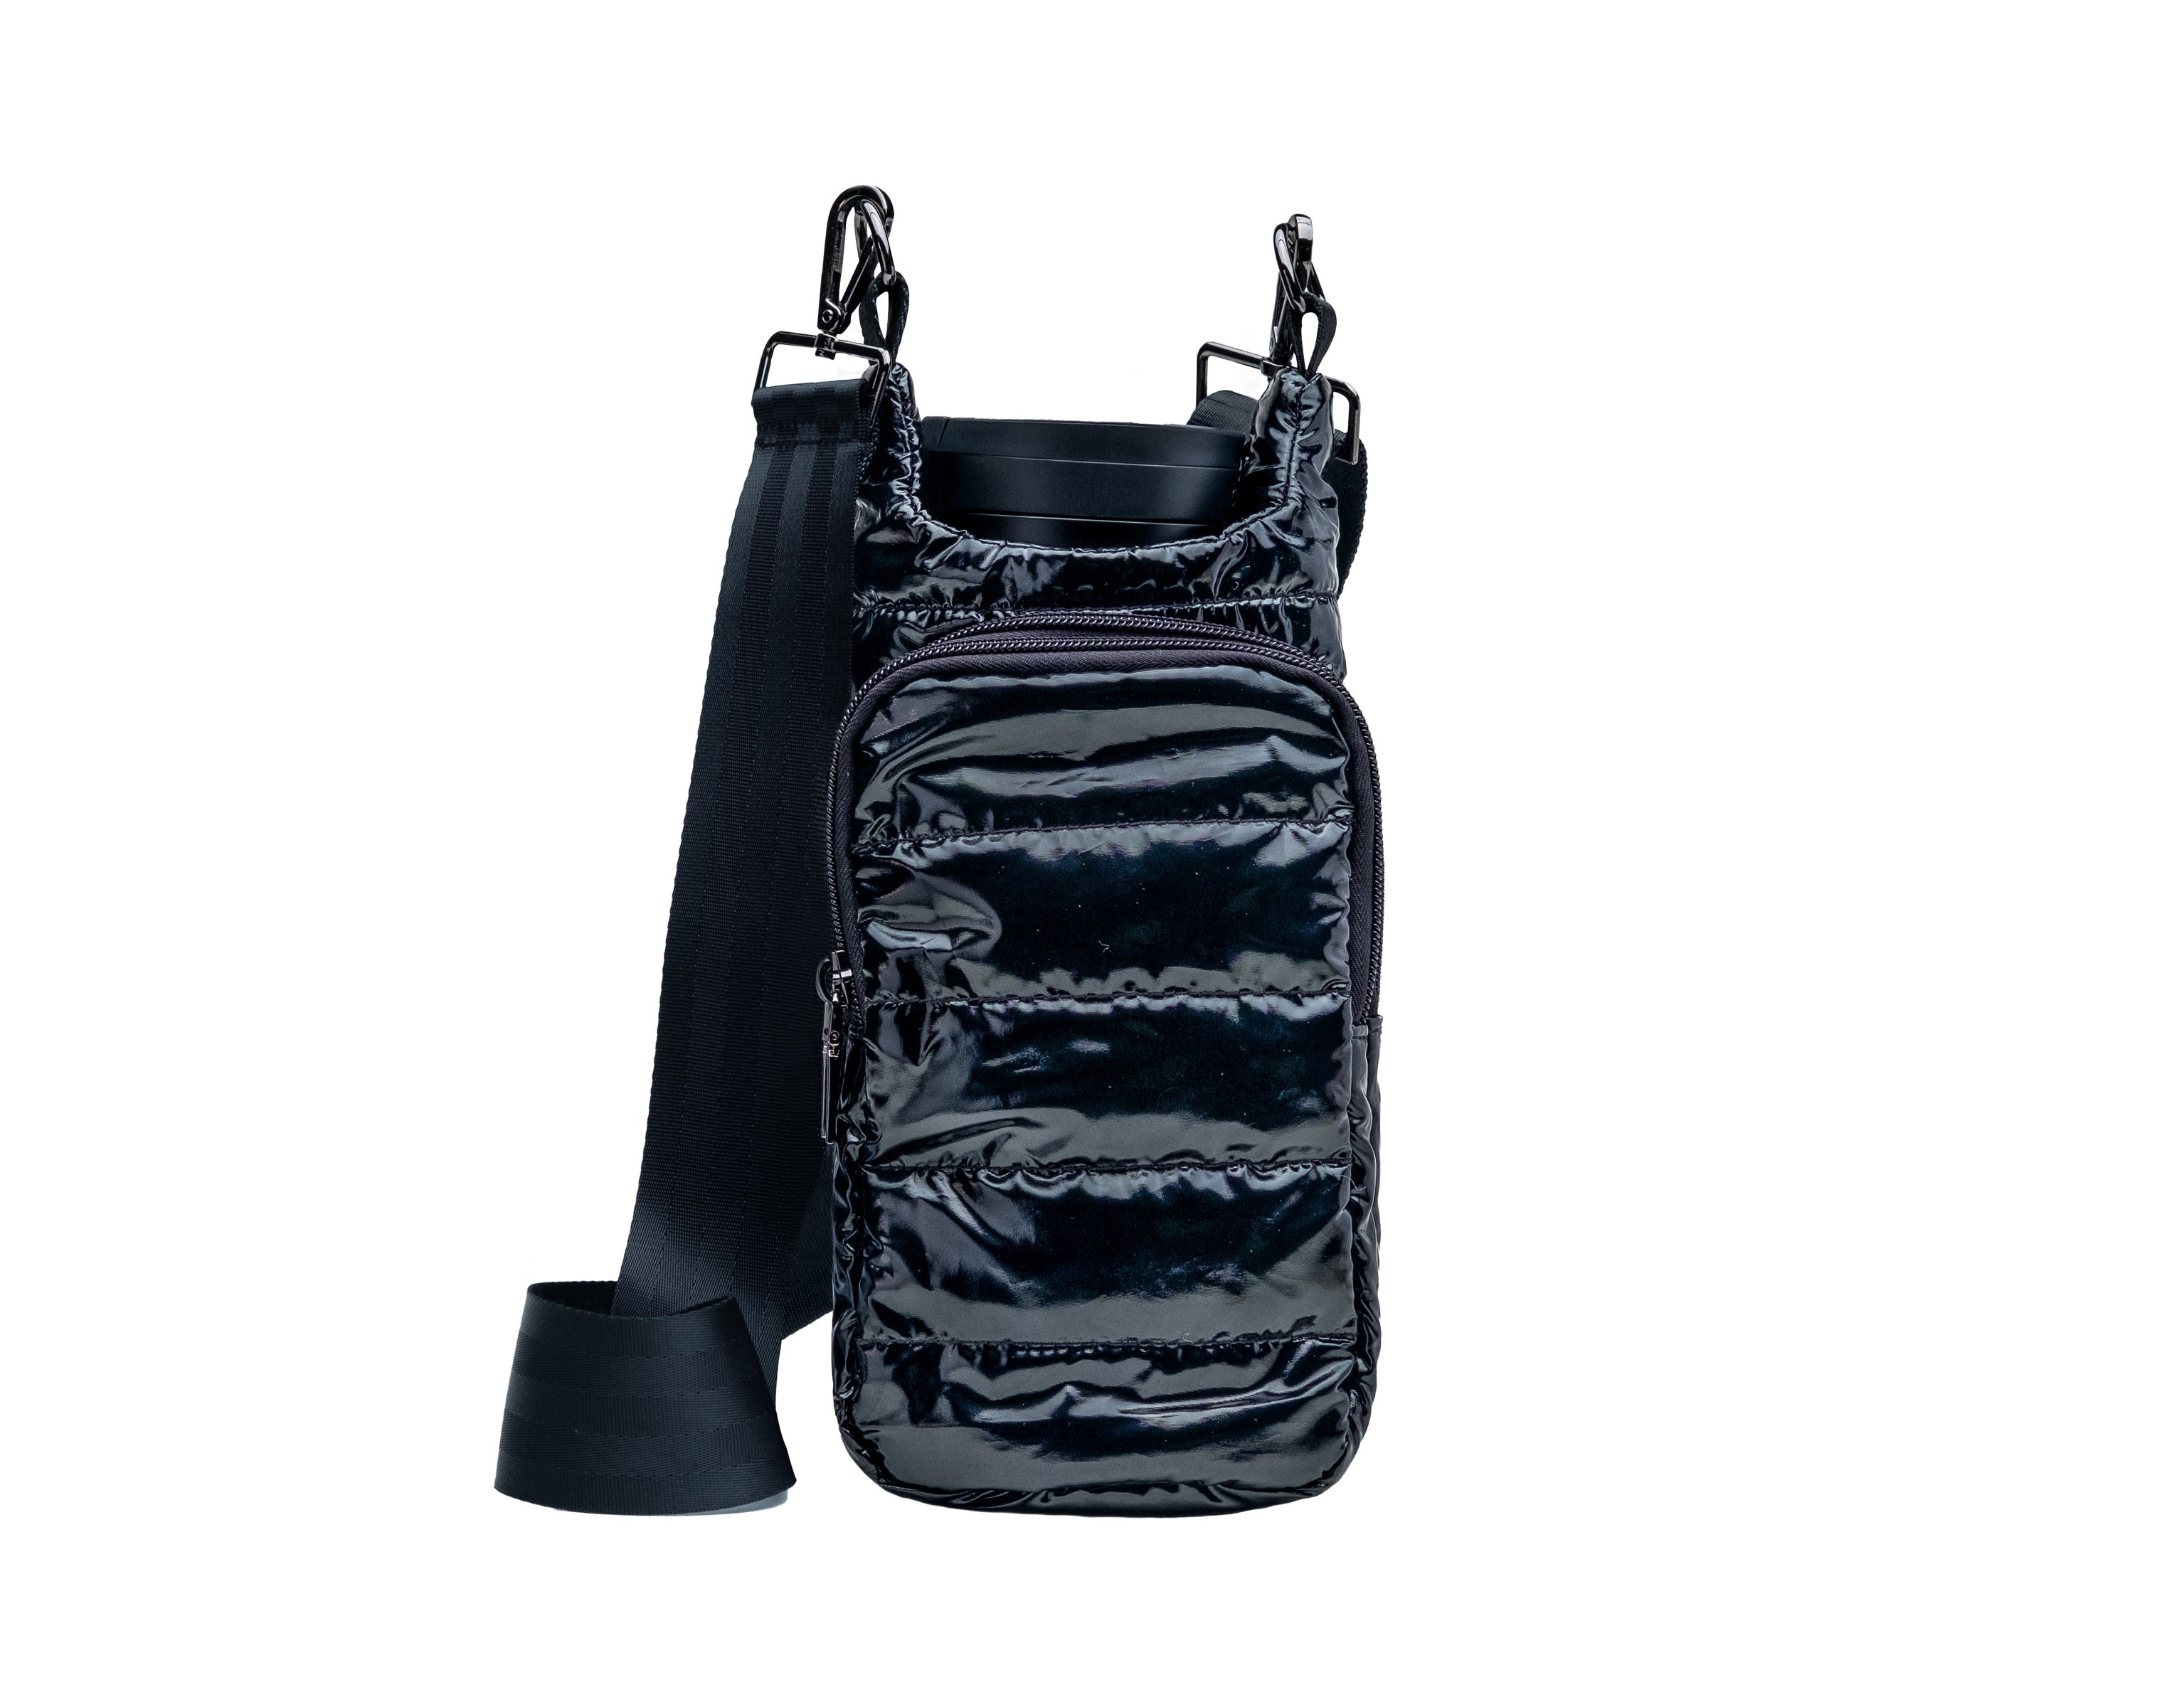 Wholesale Packs - Black Glossy HydroBag with Black Strap